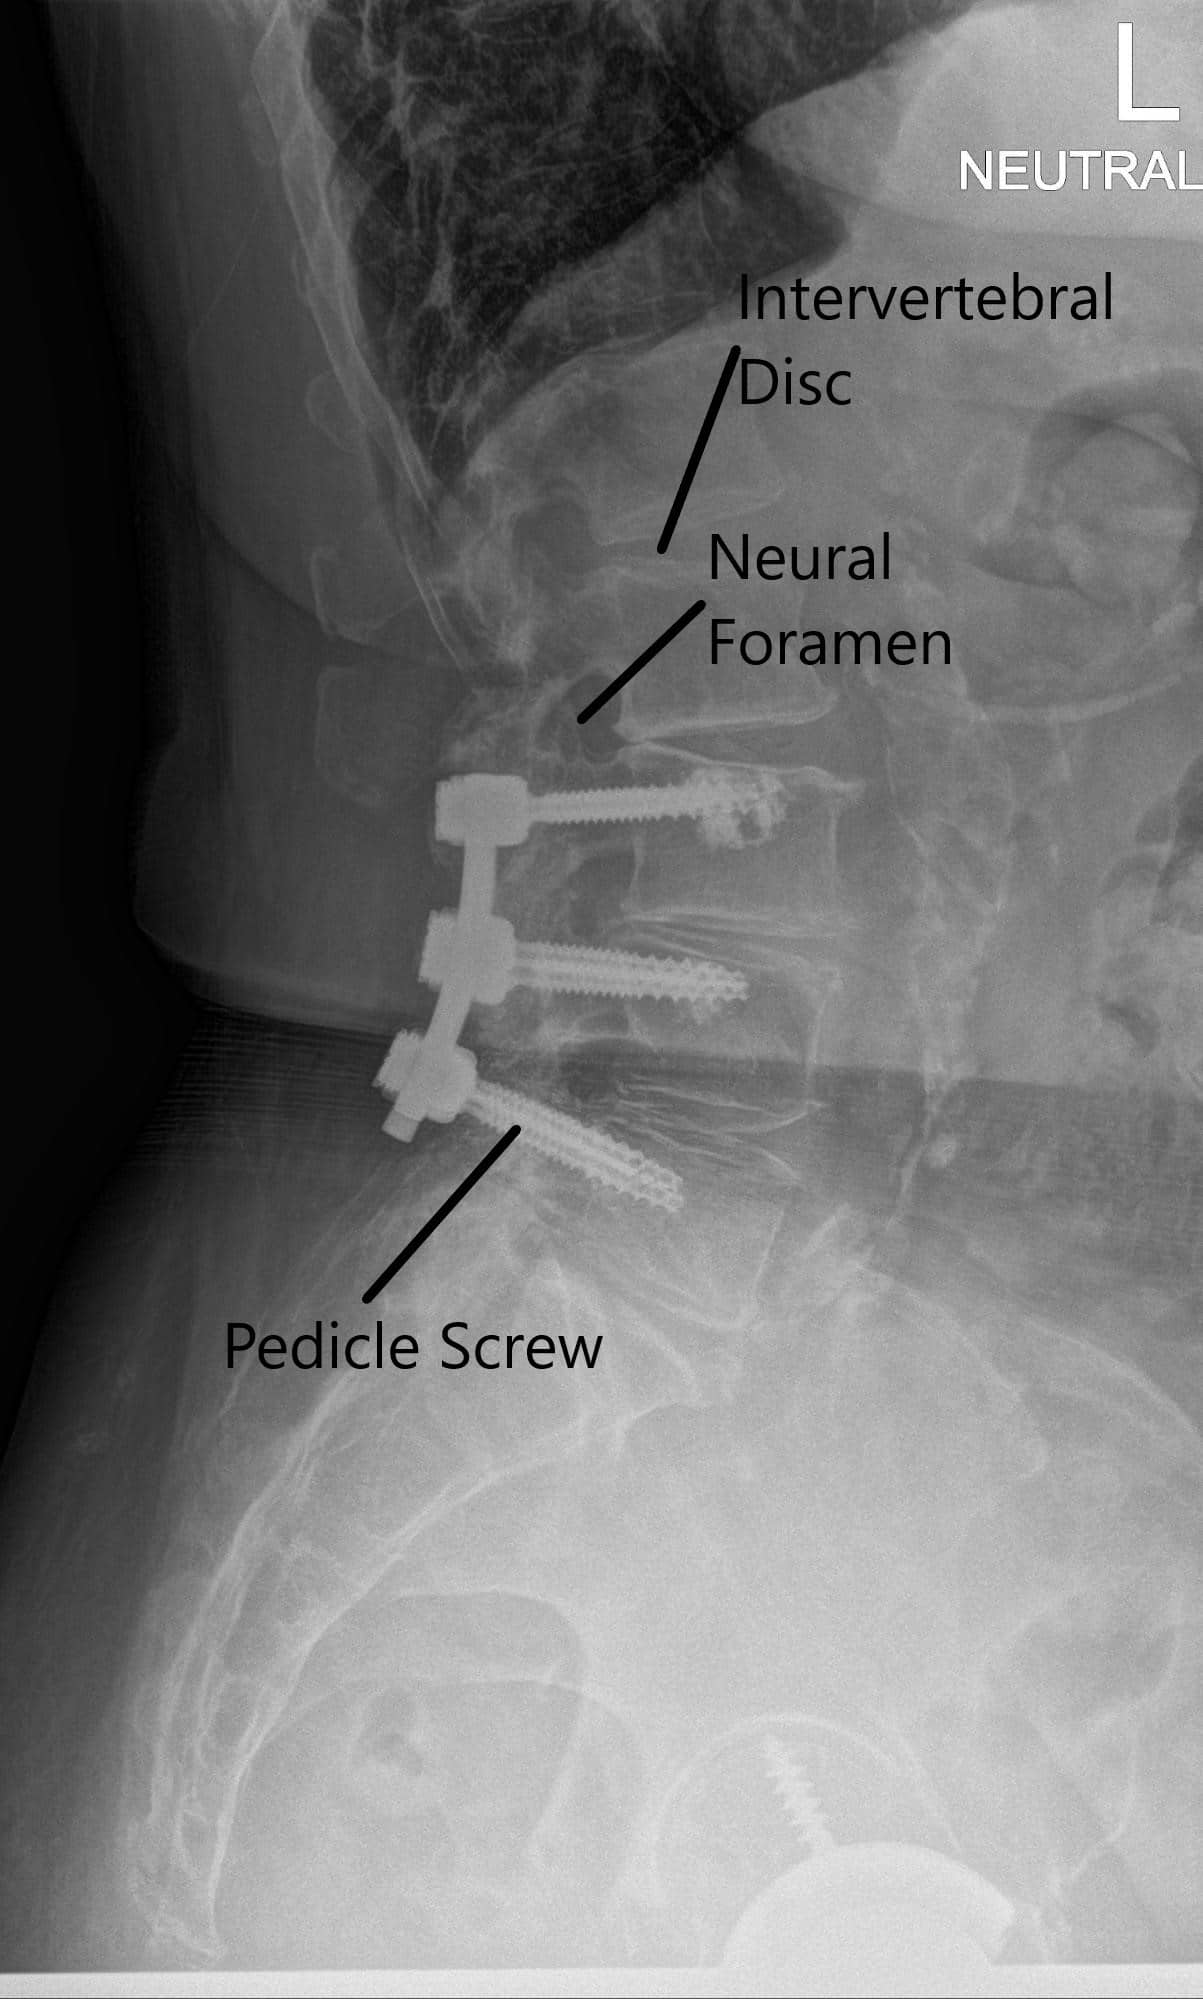 X-ray of the LS spine in AP and Lateral views 2